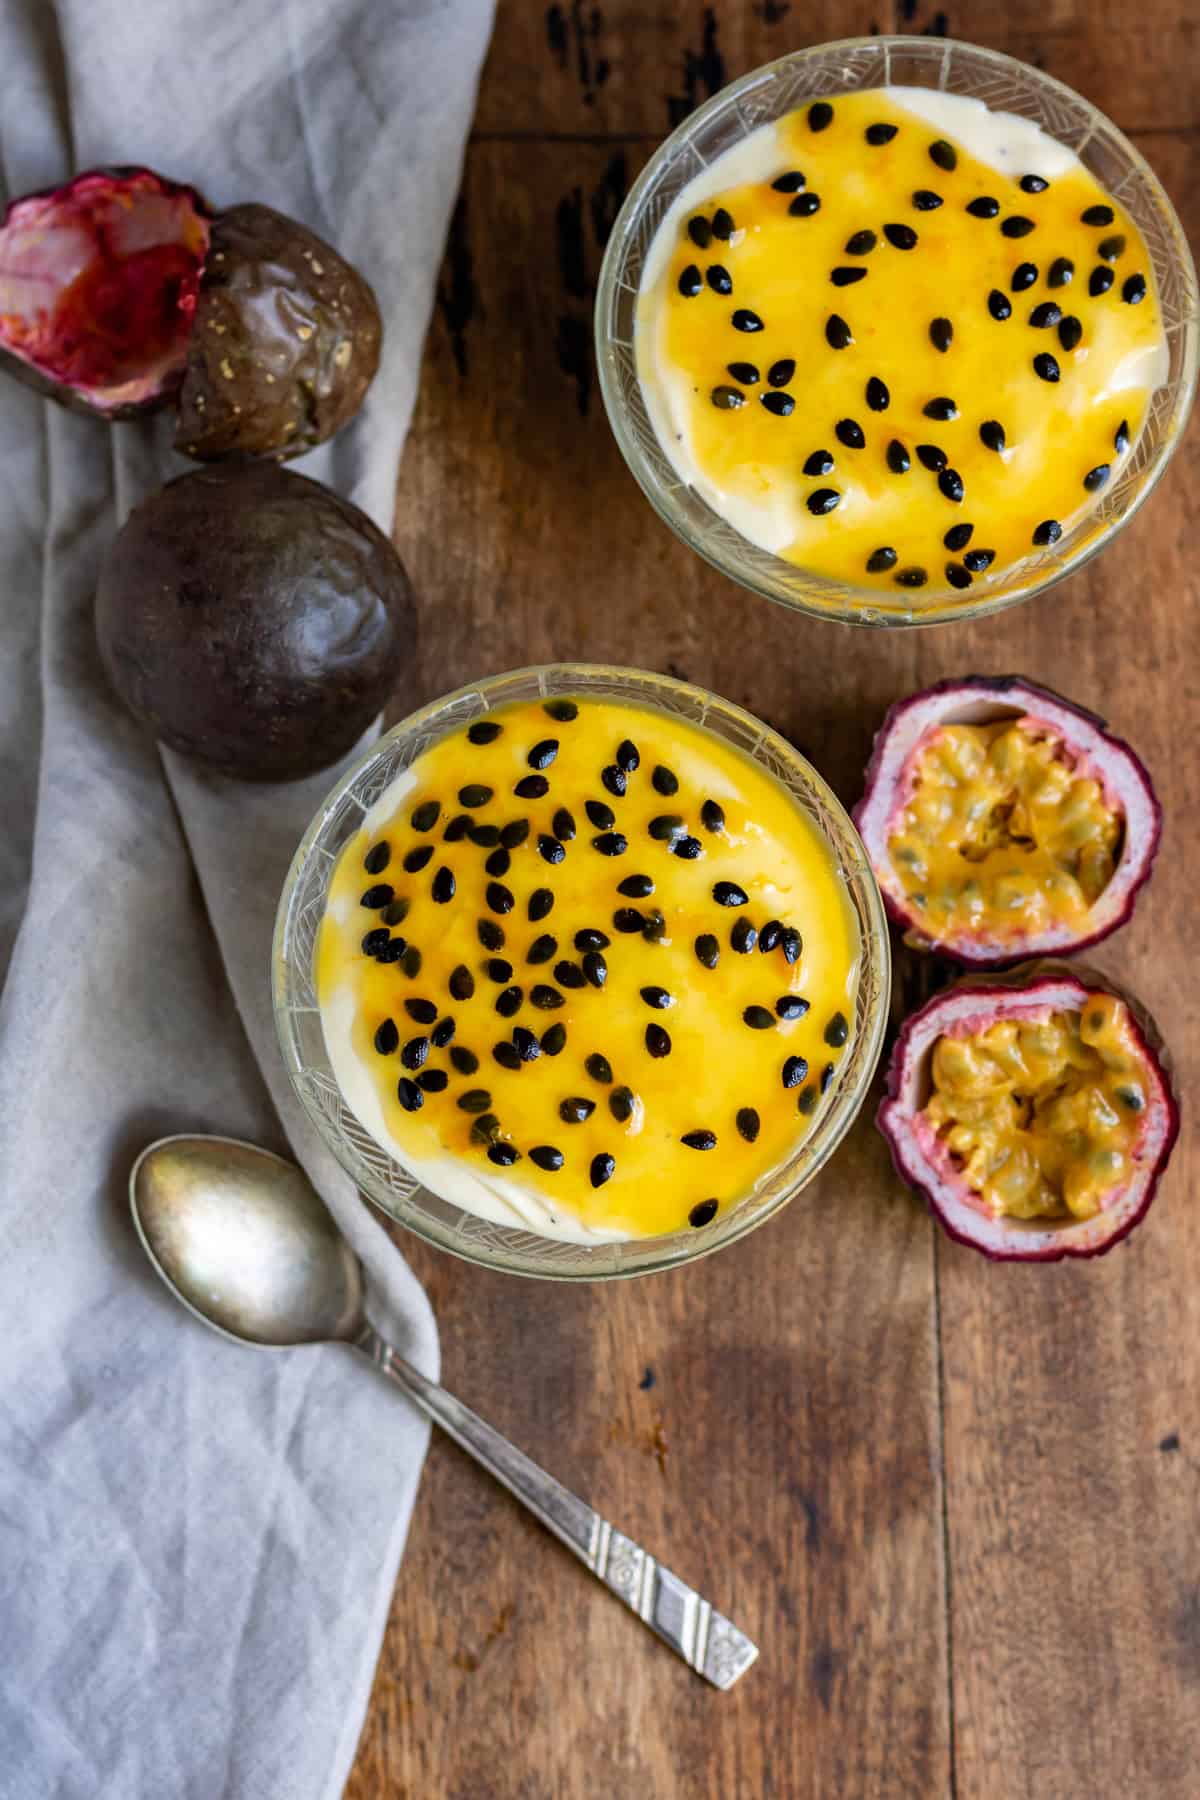 Wooden table with two glass dishes of passion fruit mousse.